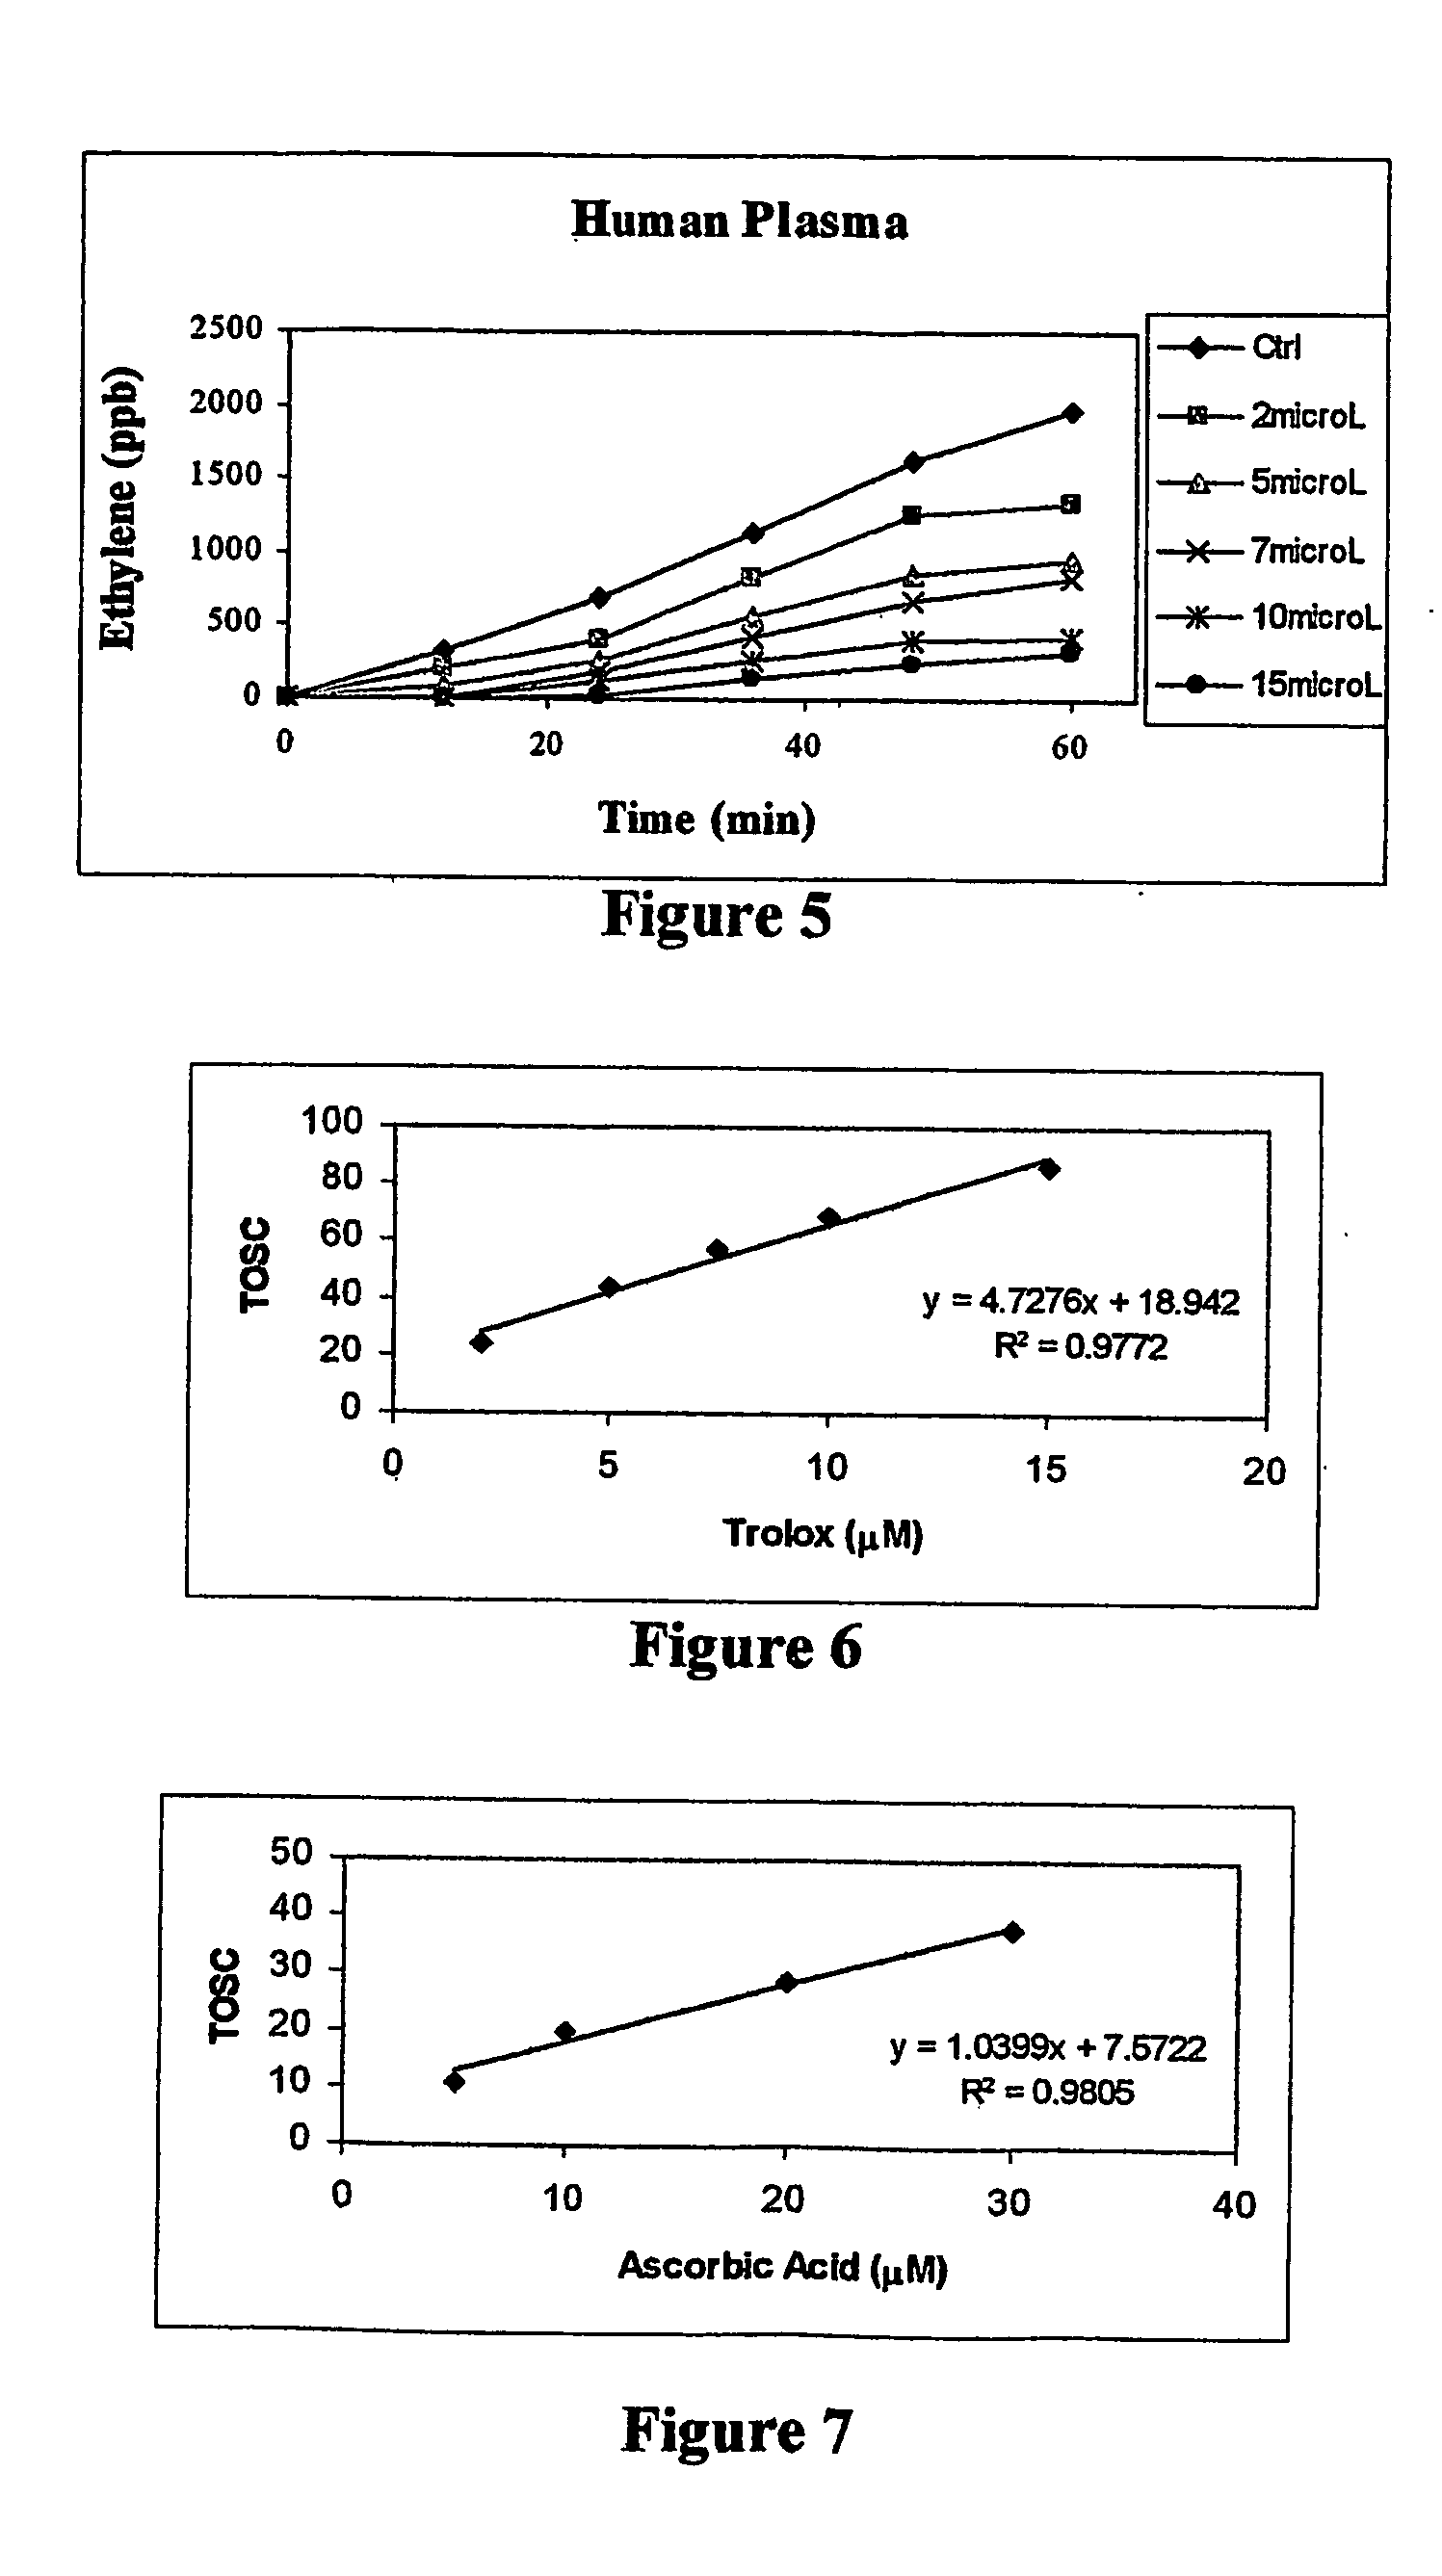 Method of assaying the antioxidant activity of pure compounds, extracts and biological fluids